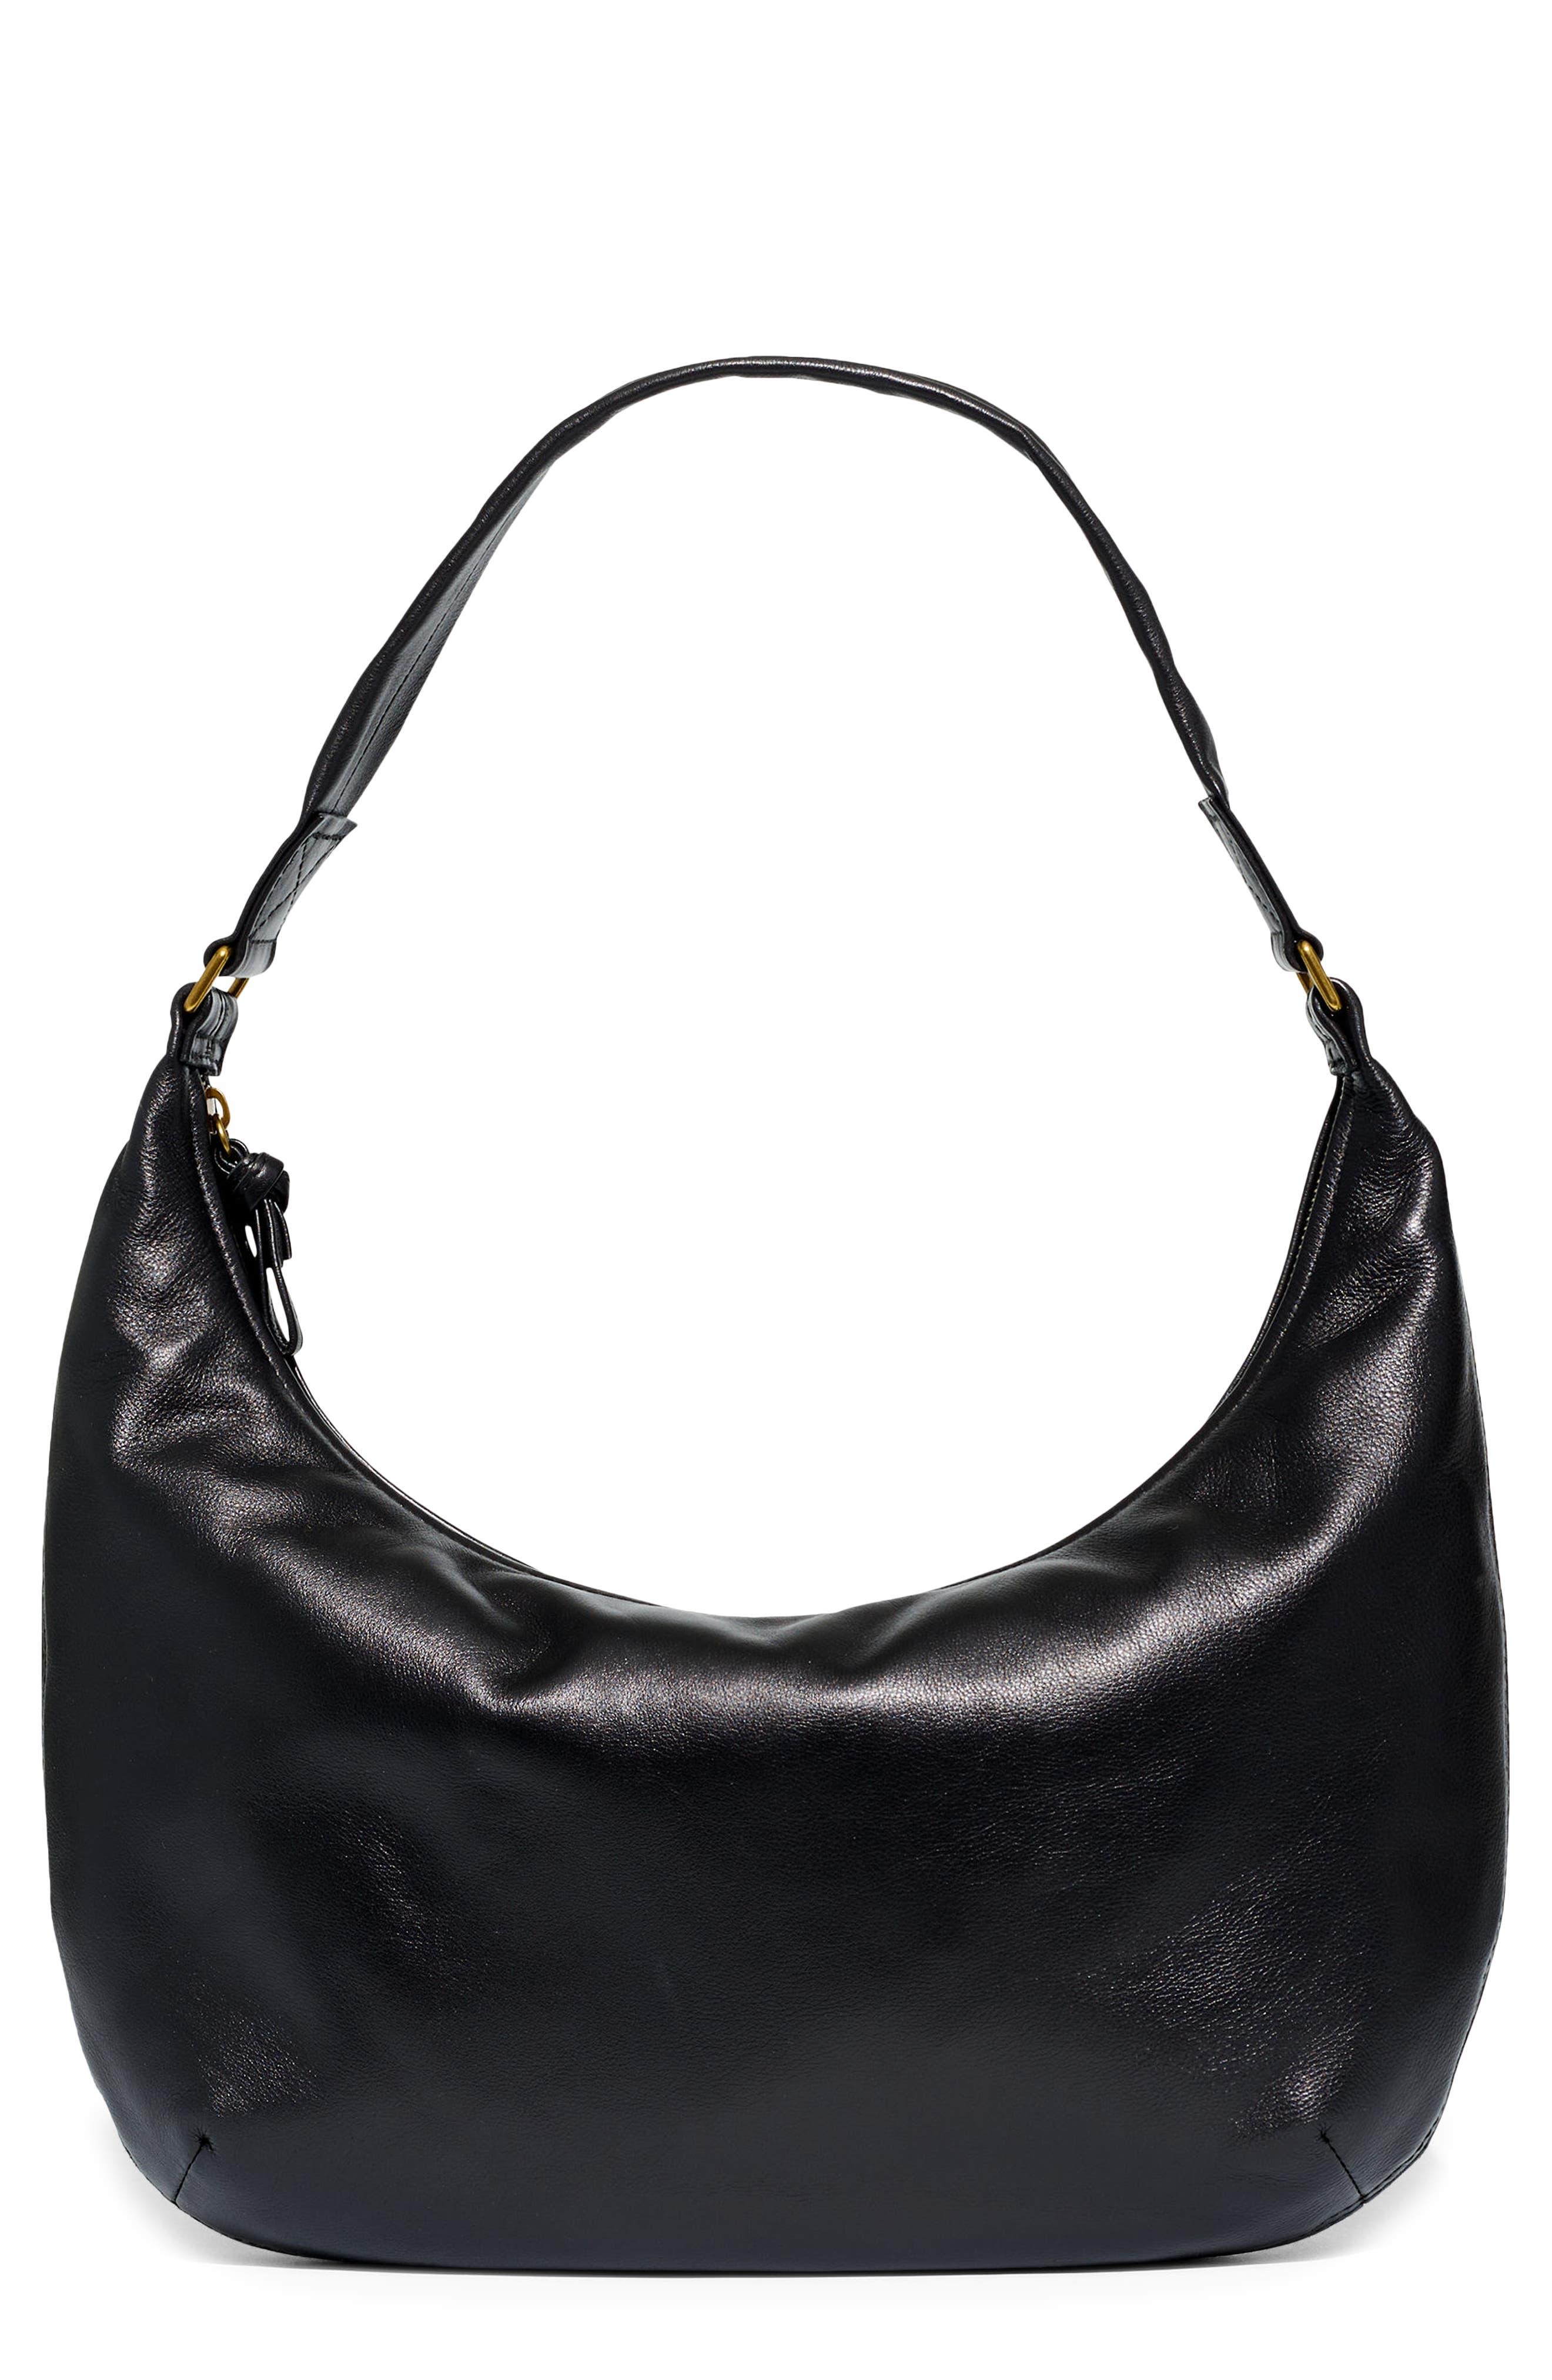 Madewell The Piazza Slouch Shoulder Bag in Black | Lyst